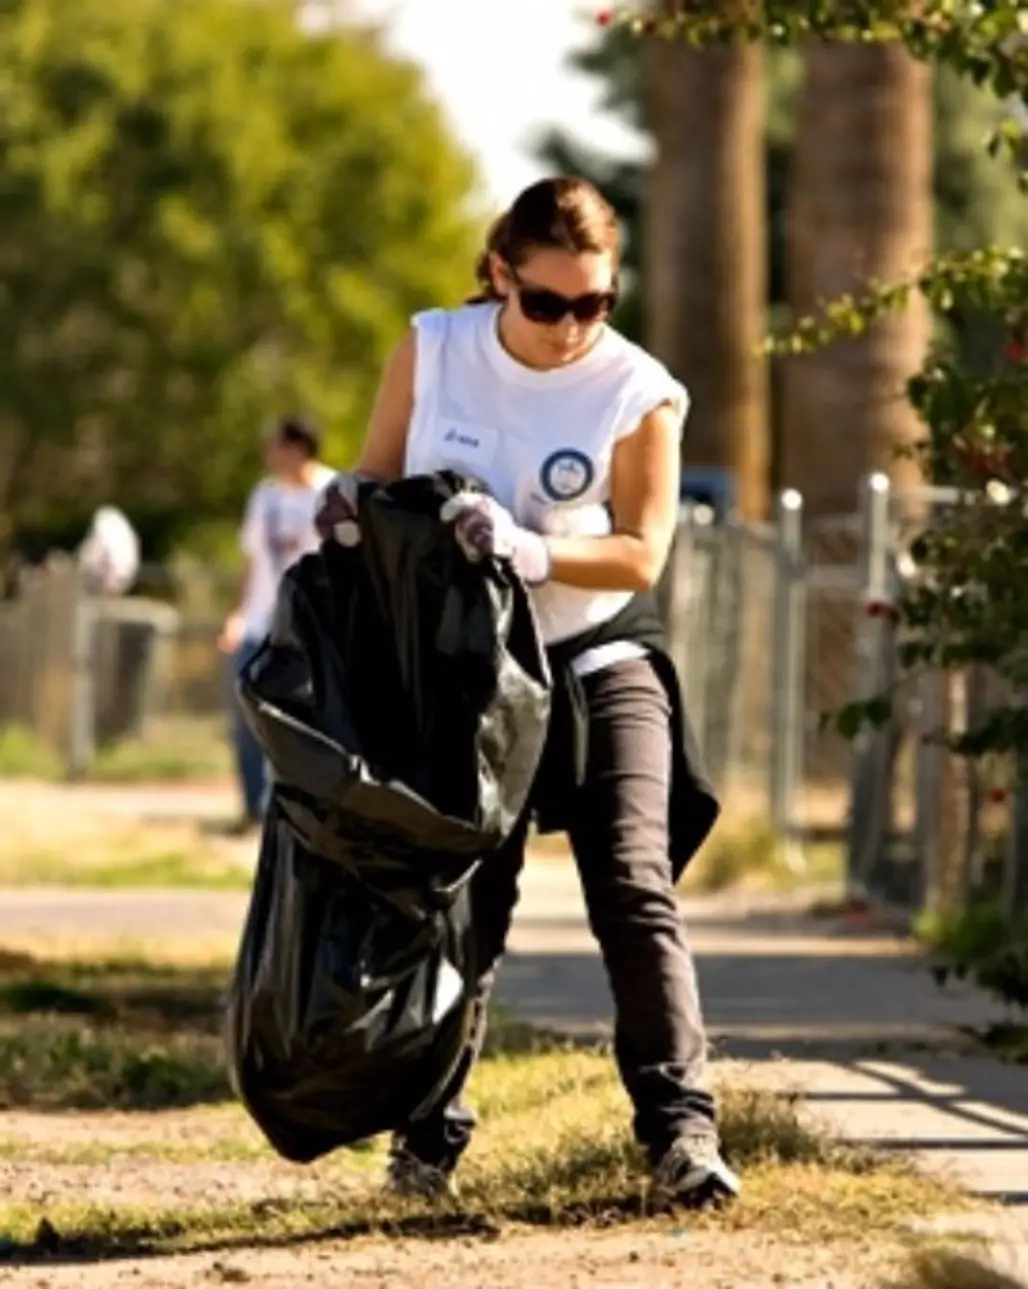 Volunteer and Pick up Trash for 20 Minutes